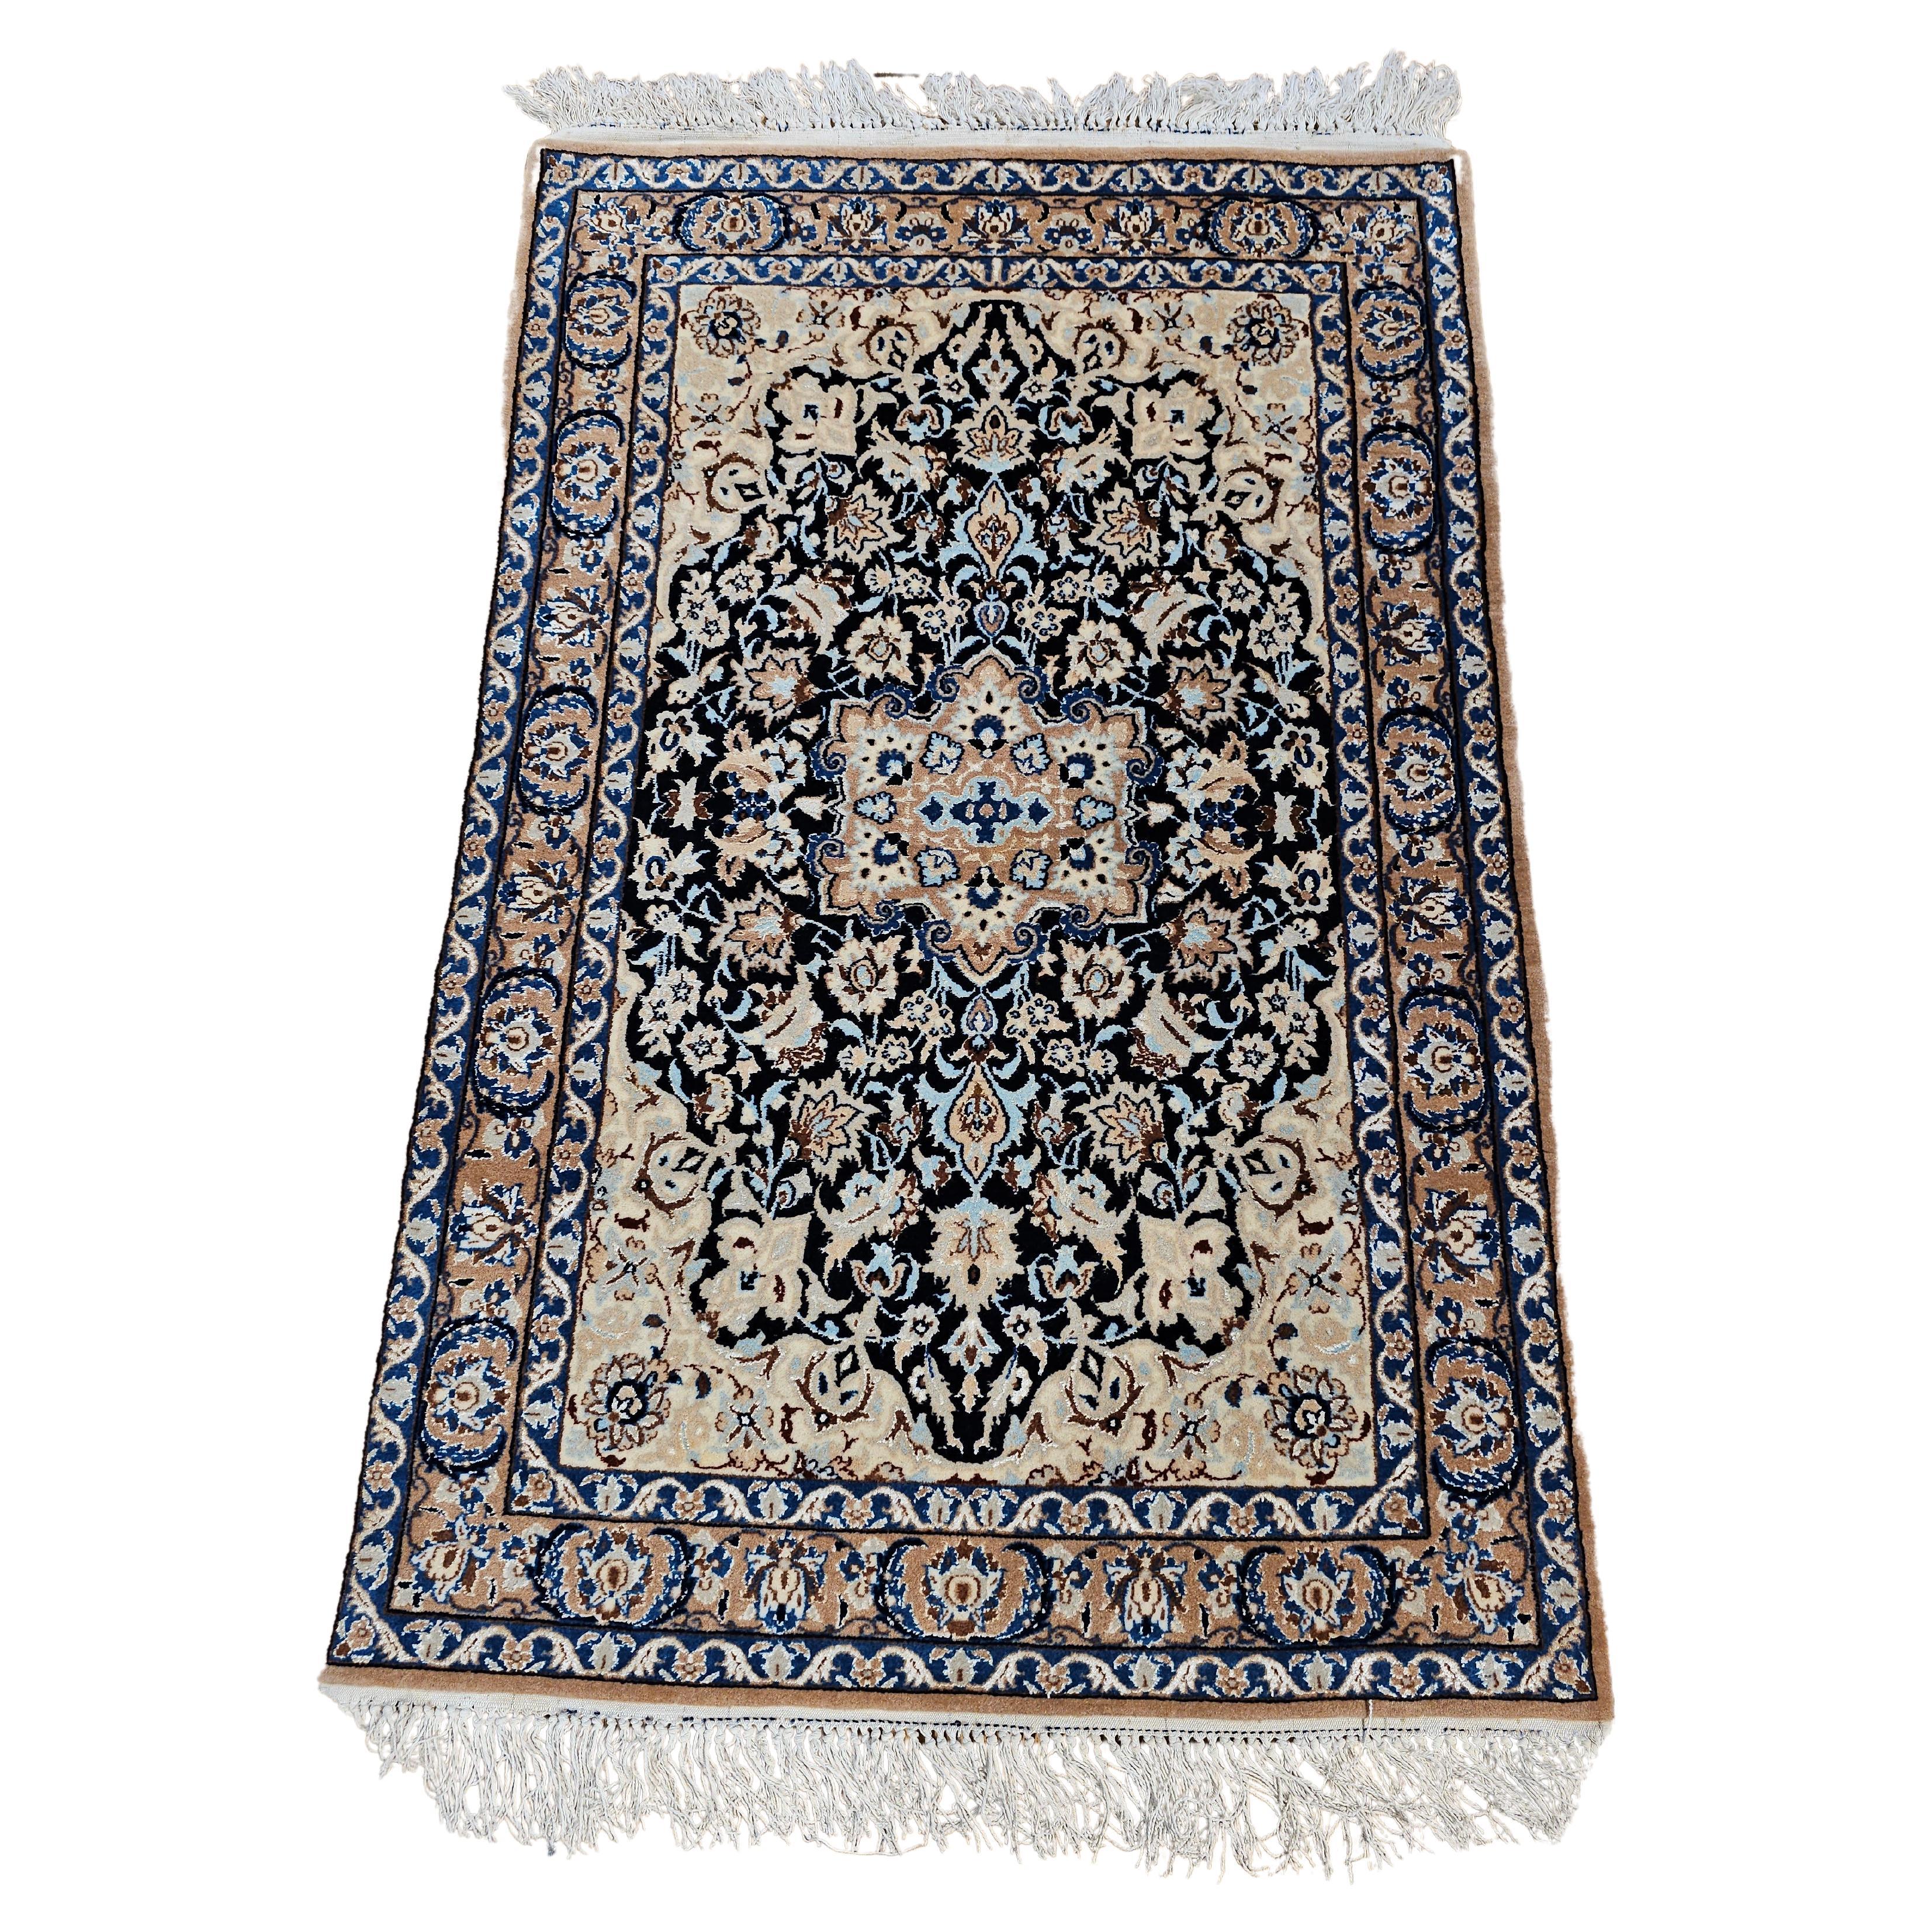 Vintage Persian Nain Area Rug in Tiffany Blue, French Blue, Navy Blue, Caramel For Sale